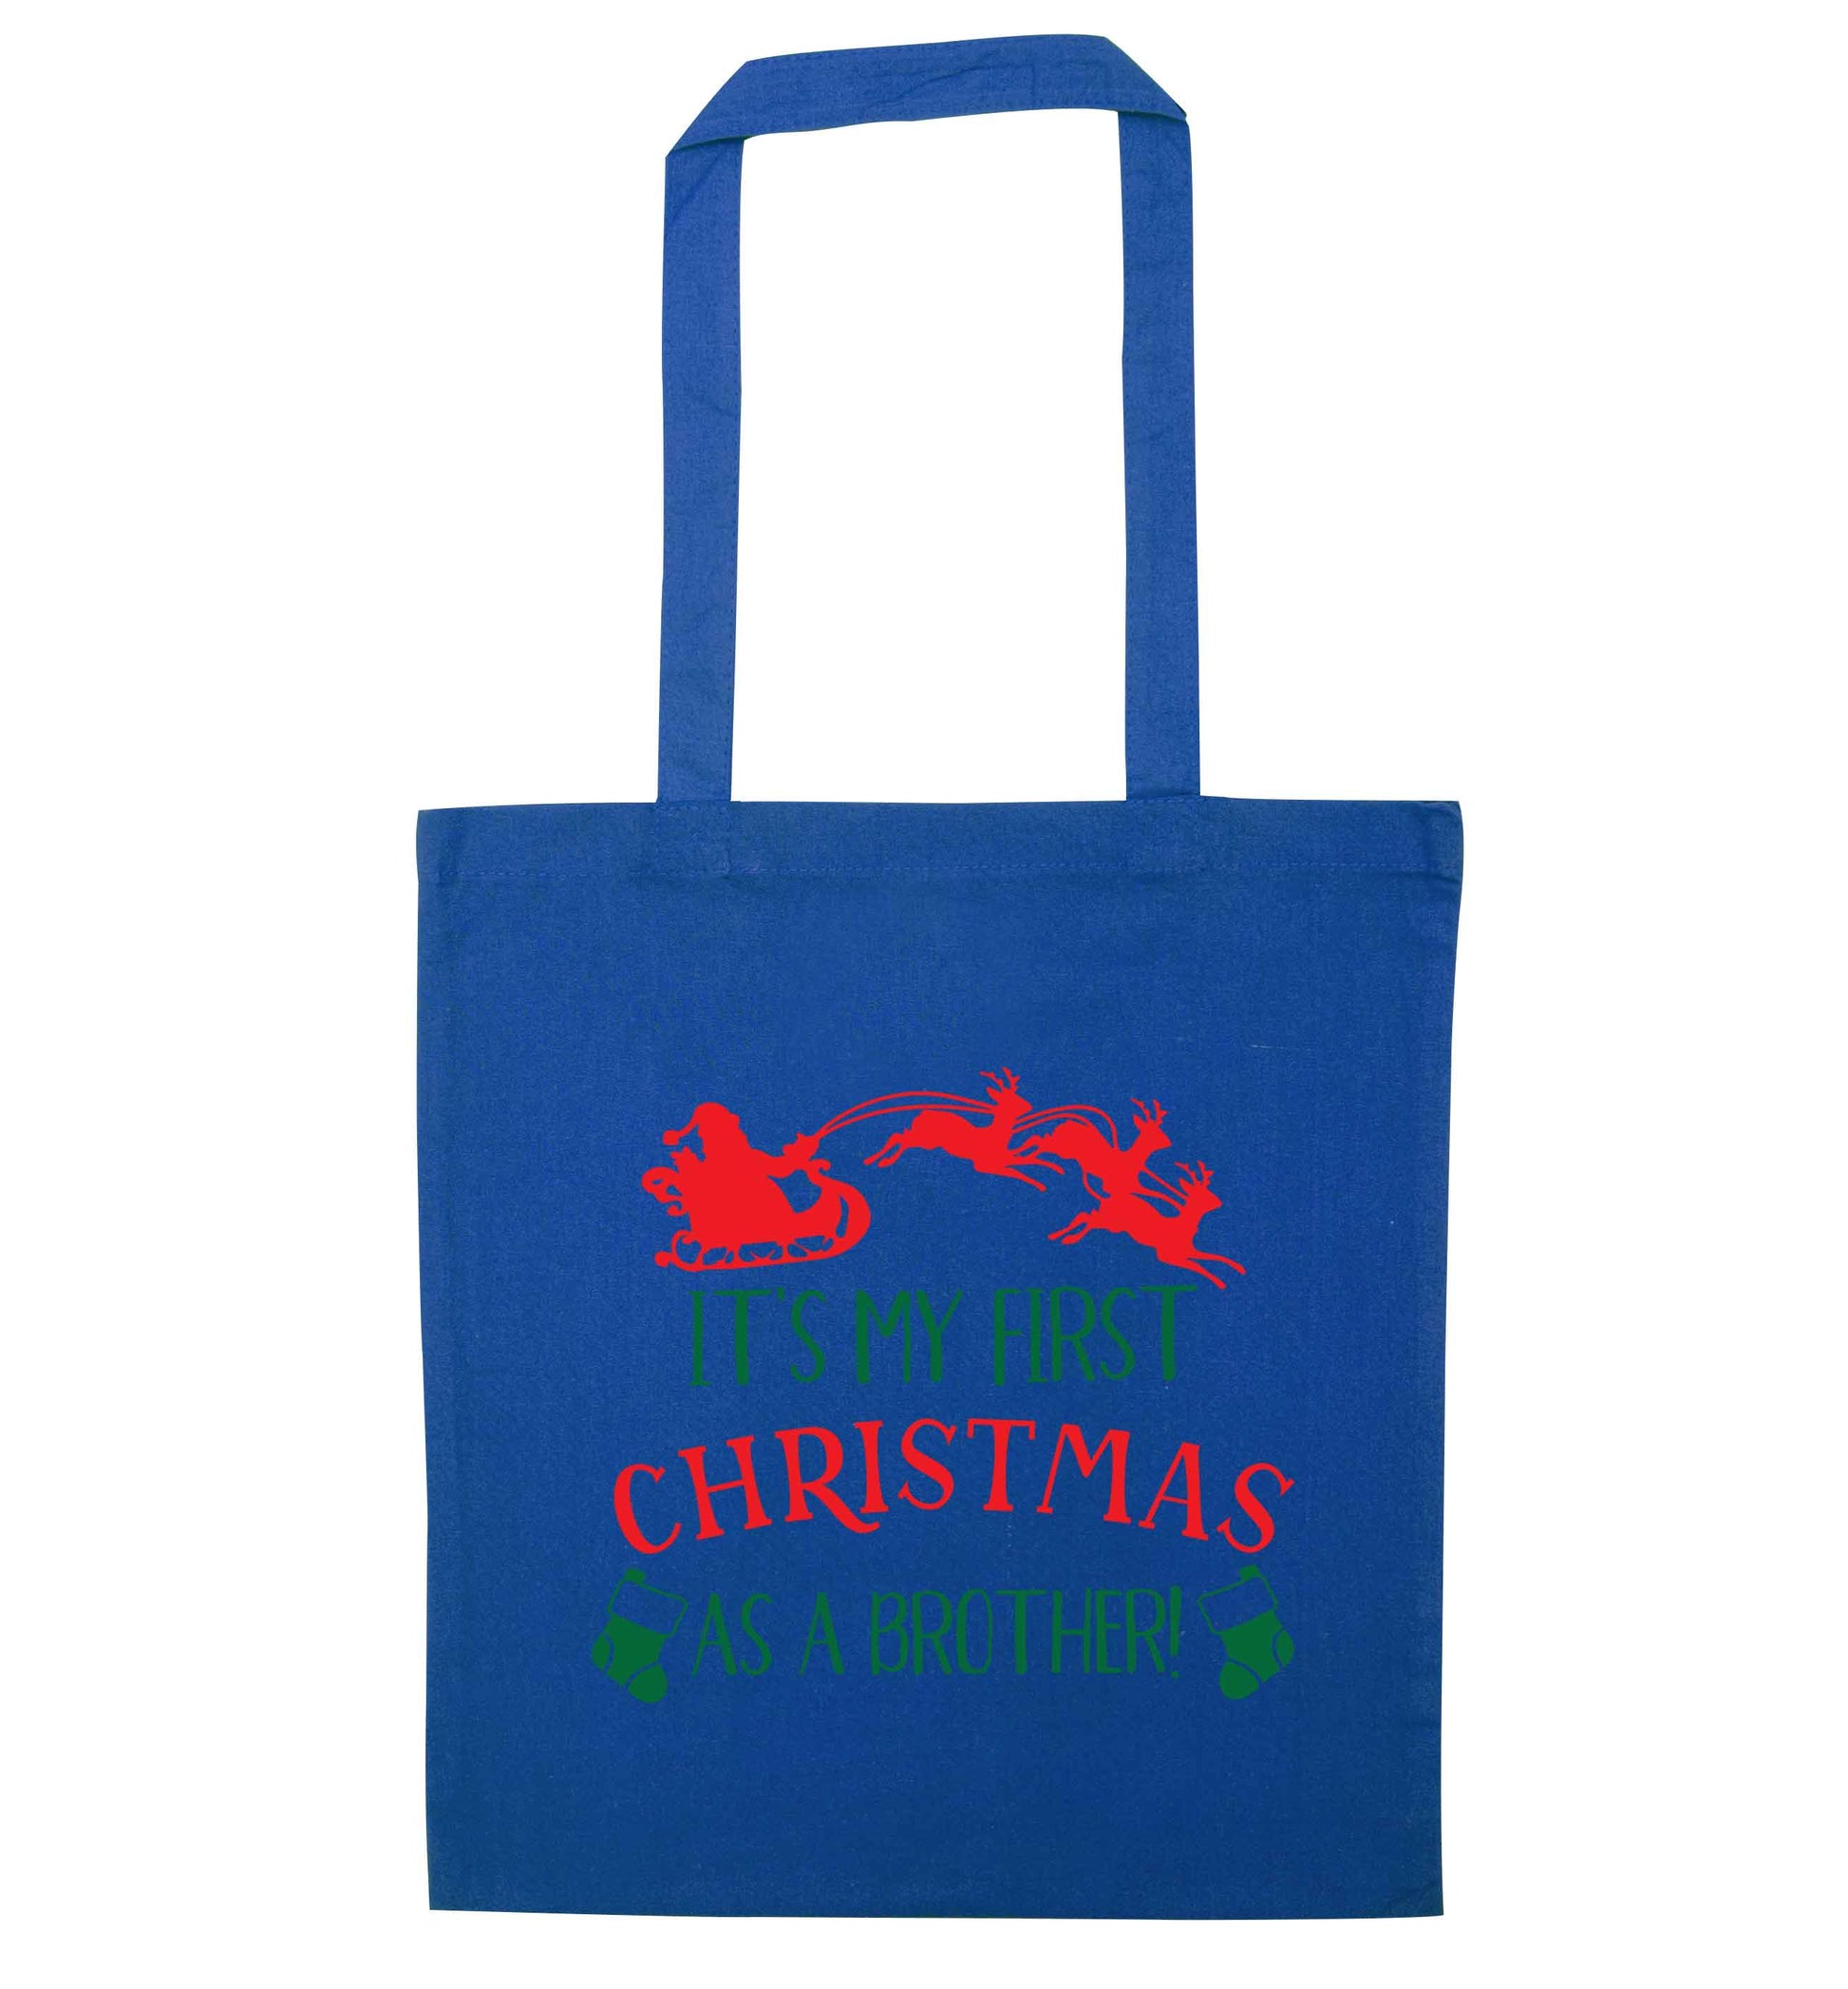 It's my first Christmas as a brother! blue tote bag